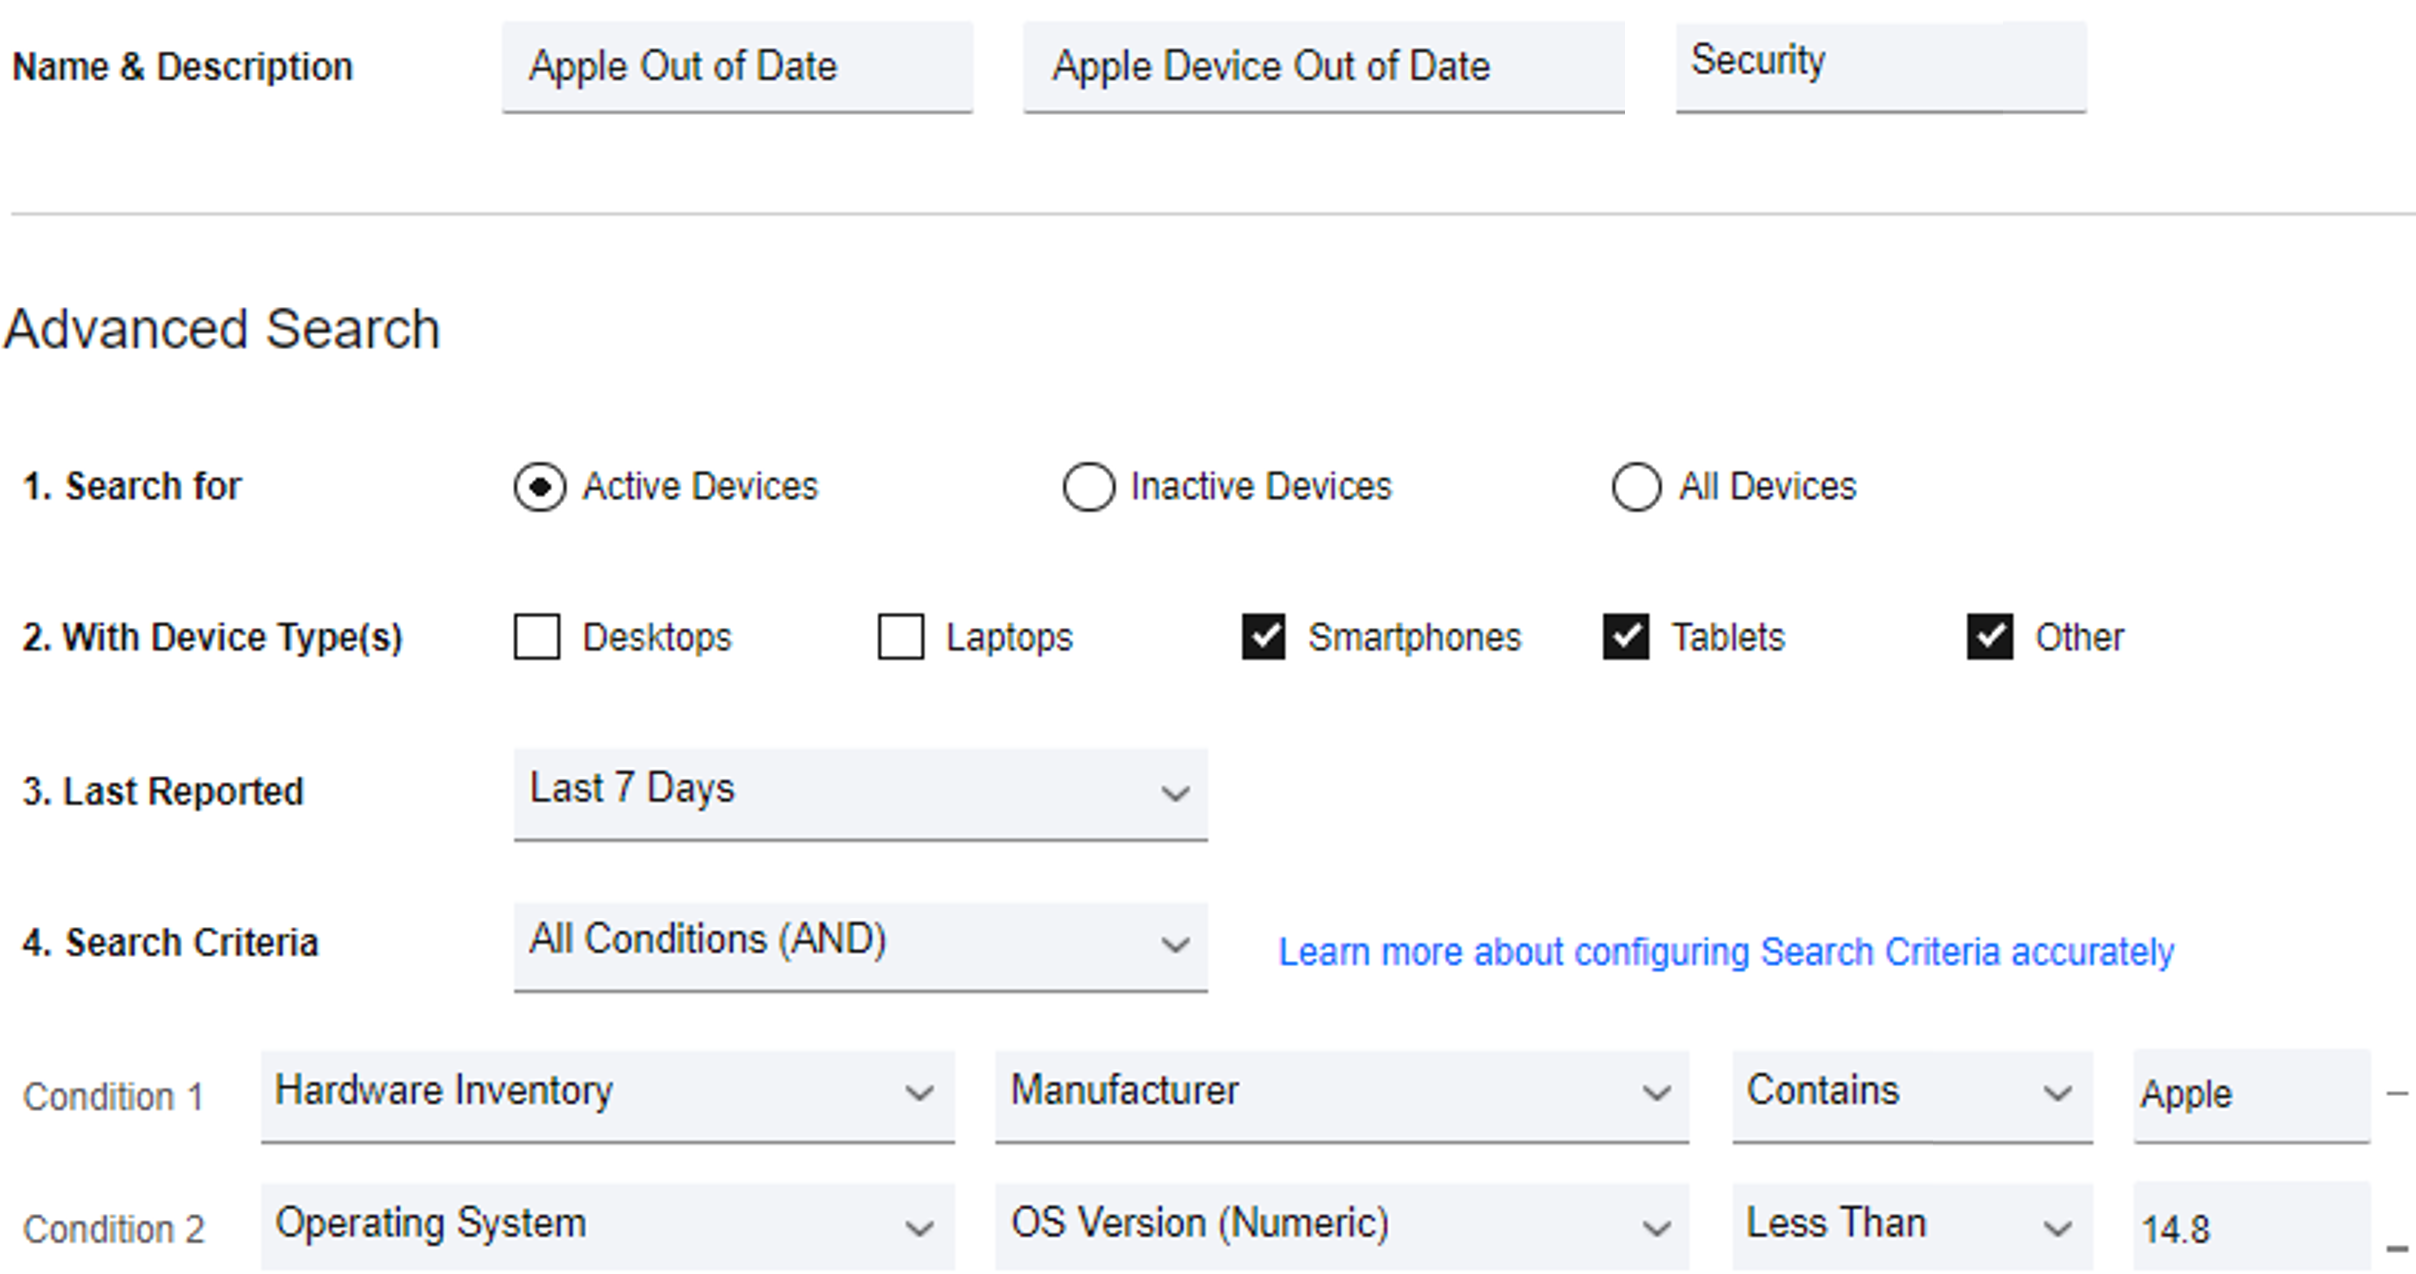 This is a screenshot depicting how we filled out the Search Criteria when creating an alert to show out-of-date Apple devices.